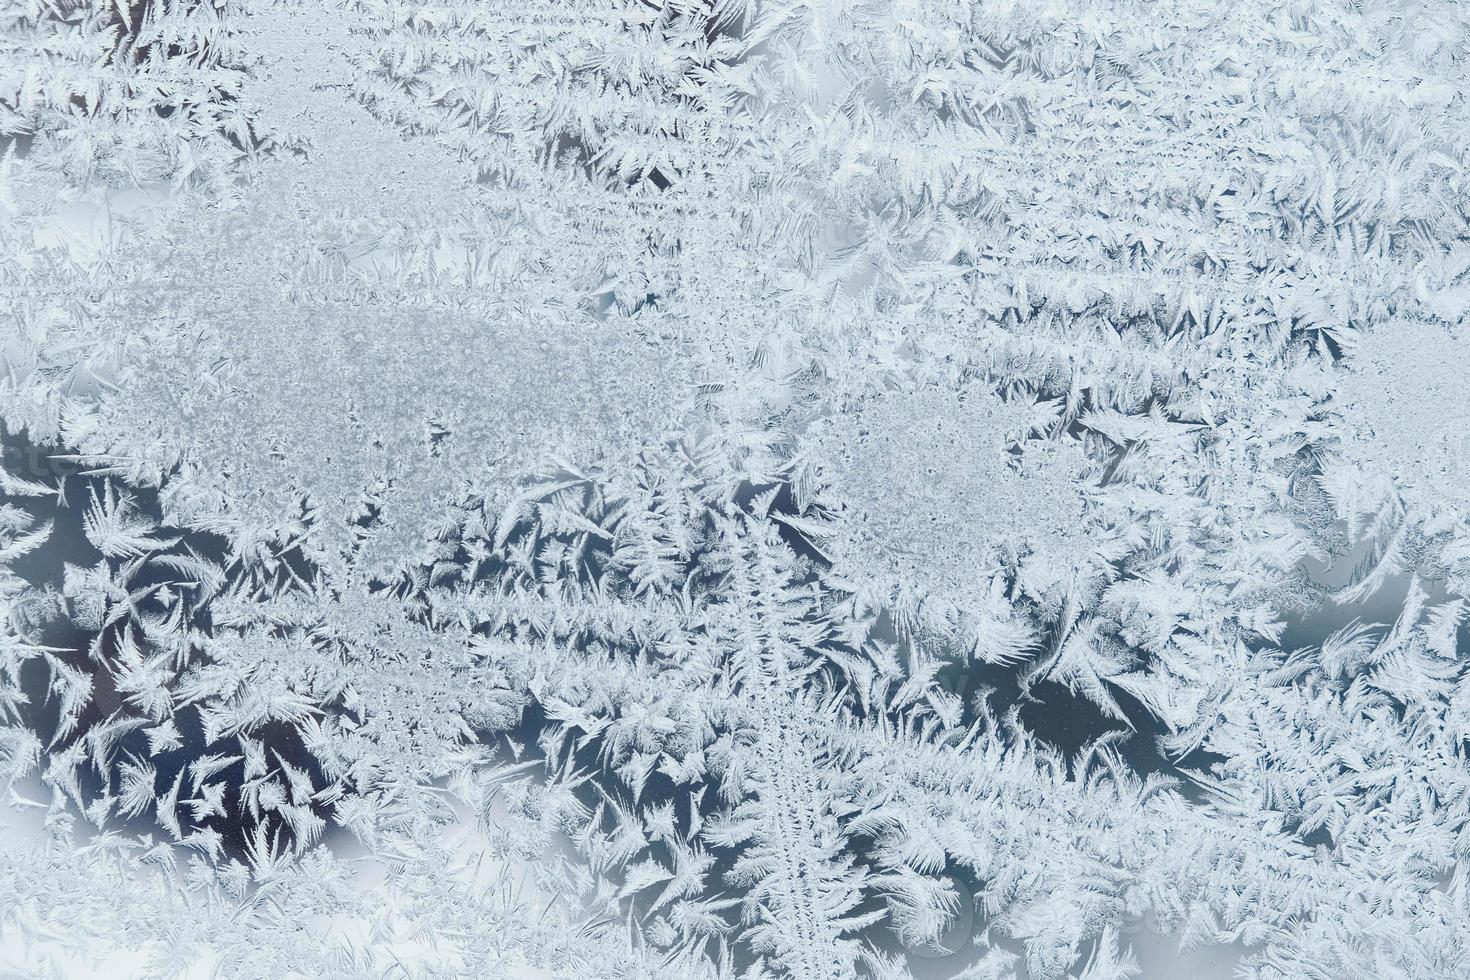 Ice patterns on frozen glass. Abstract ice pattern on winter glass as a background image photo